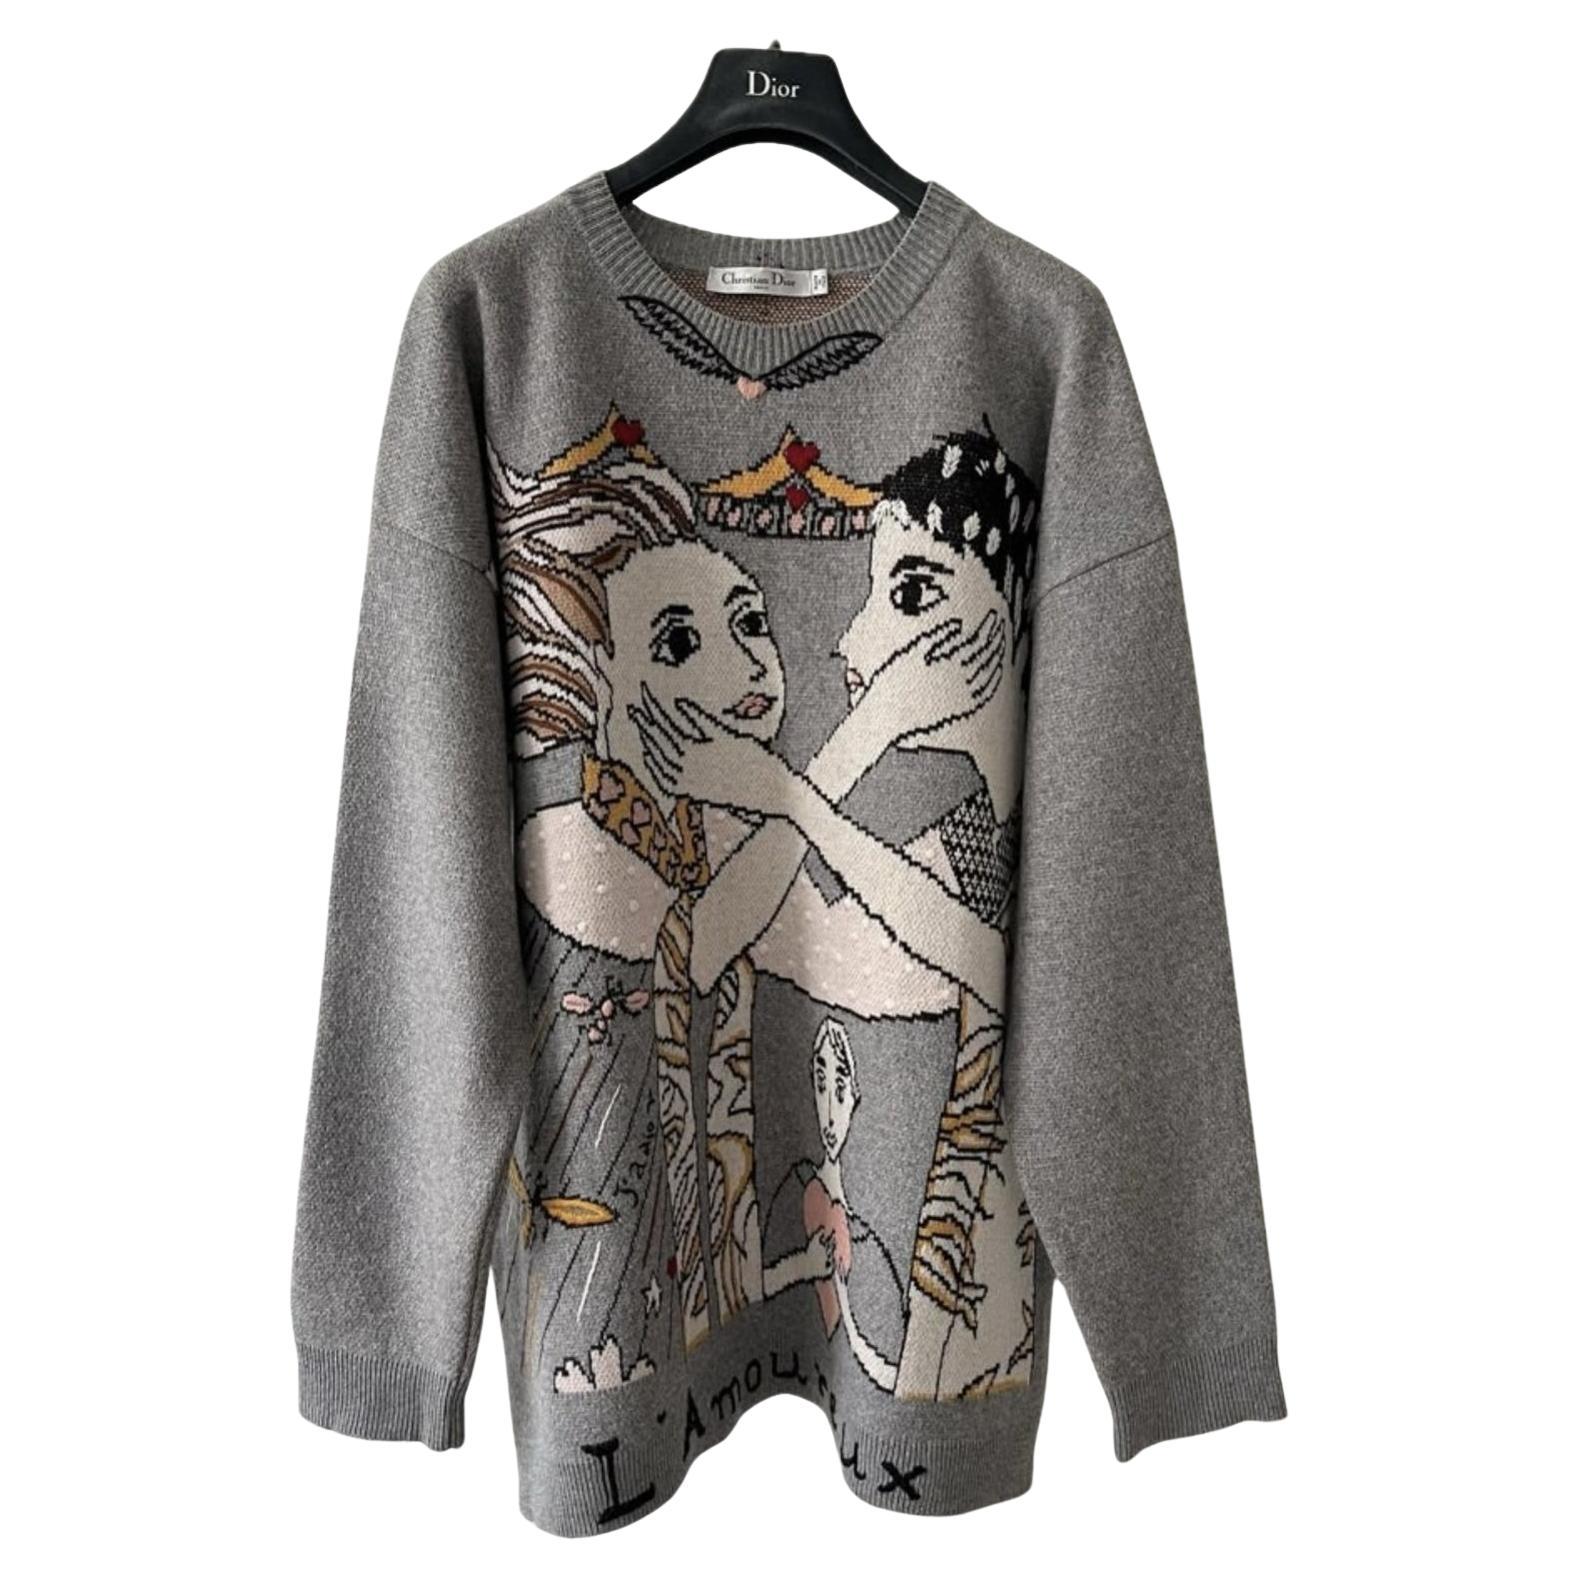 Dior Tarot Embroidery Cashmere jumper For Sale